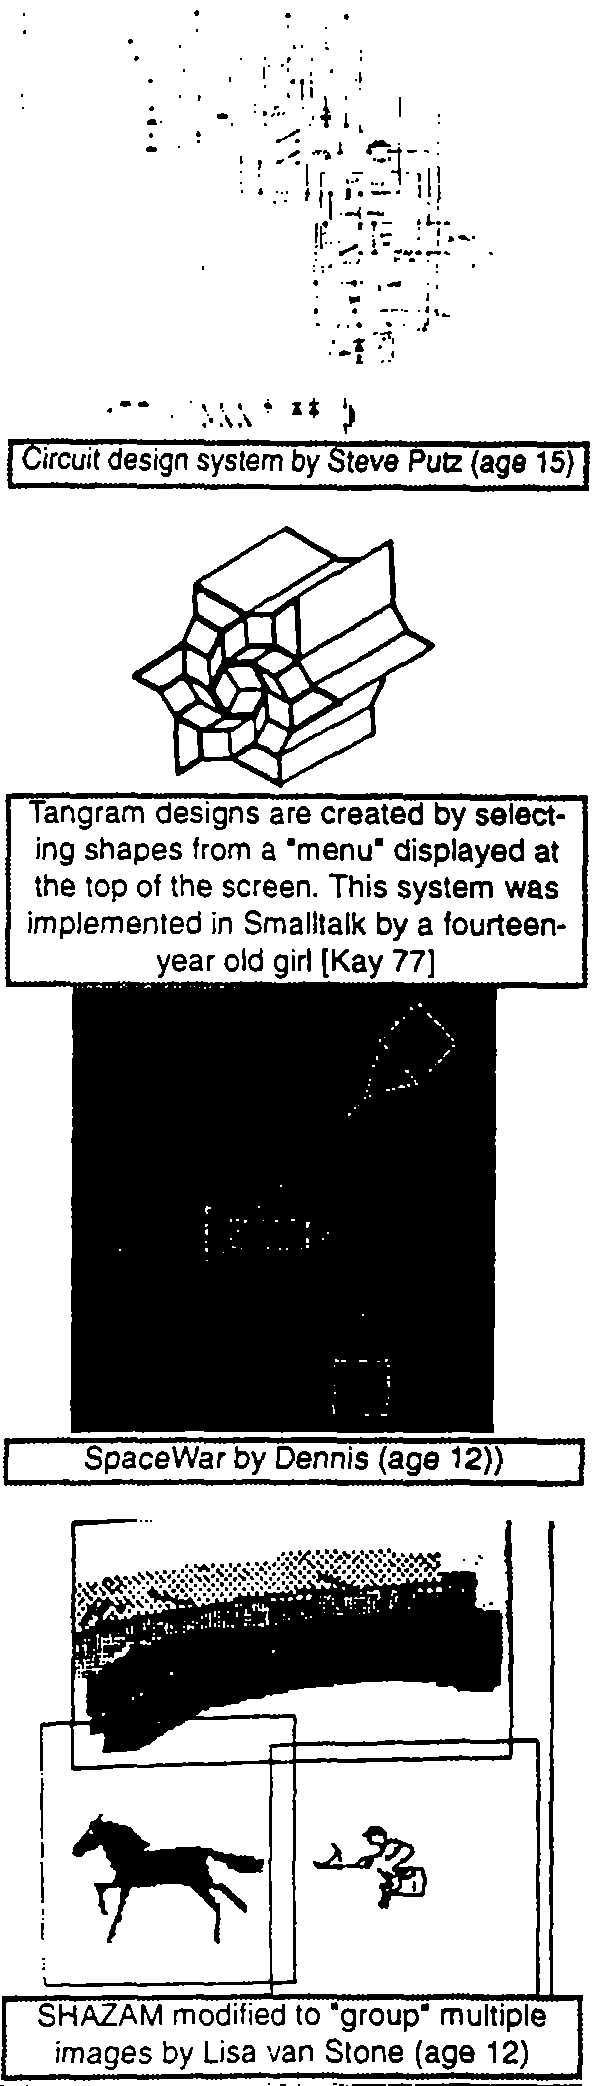 Circuit system by Steve Putz (age 15), Tangram designs are created by selecting shapes from a 'menu' displayed at the top of the screen. This system was implemented in Smalltak by a fourteen year old girl [Kay 77]